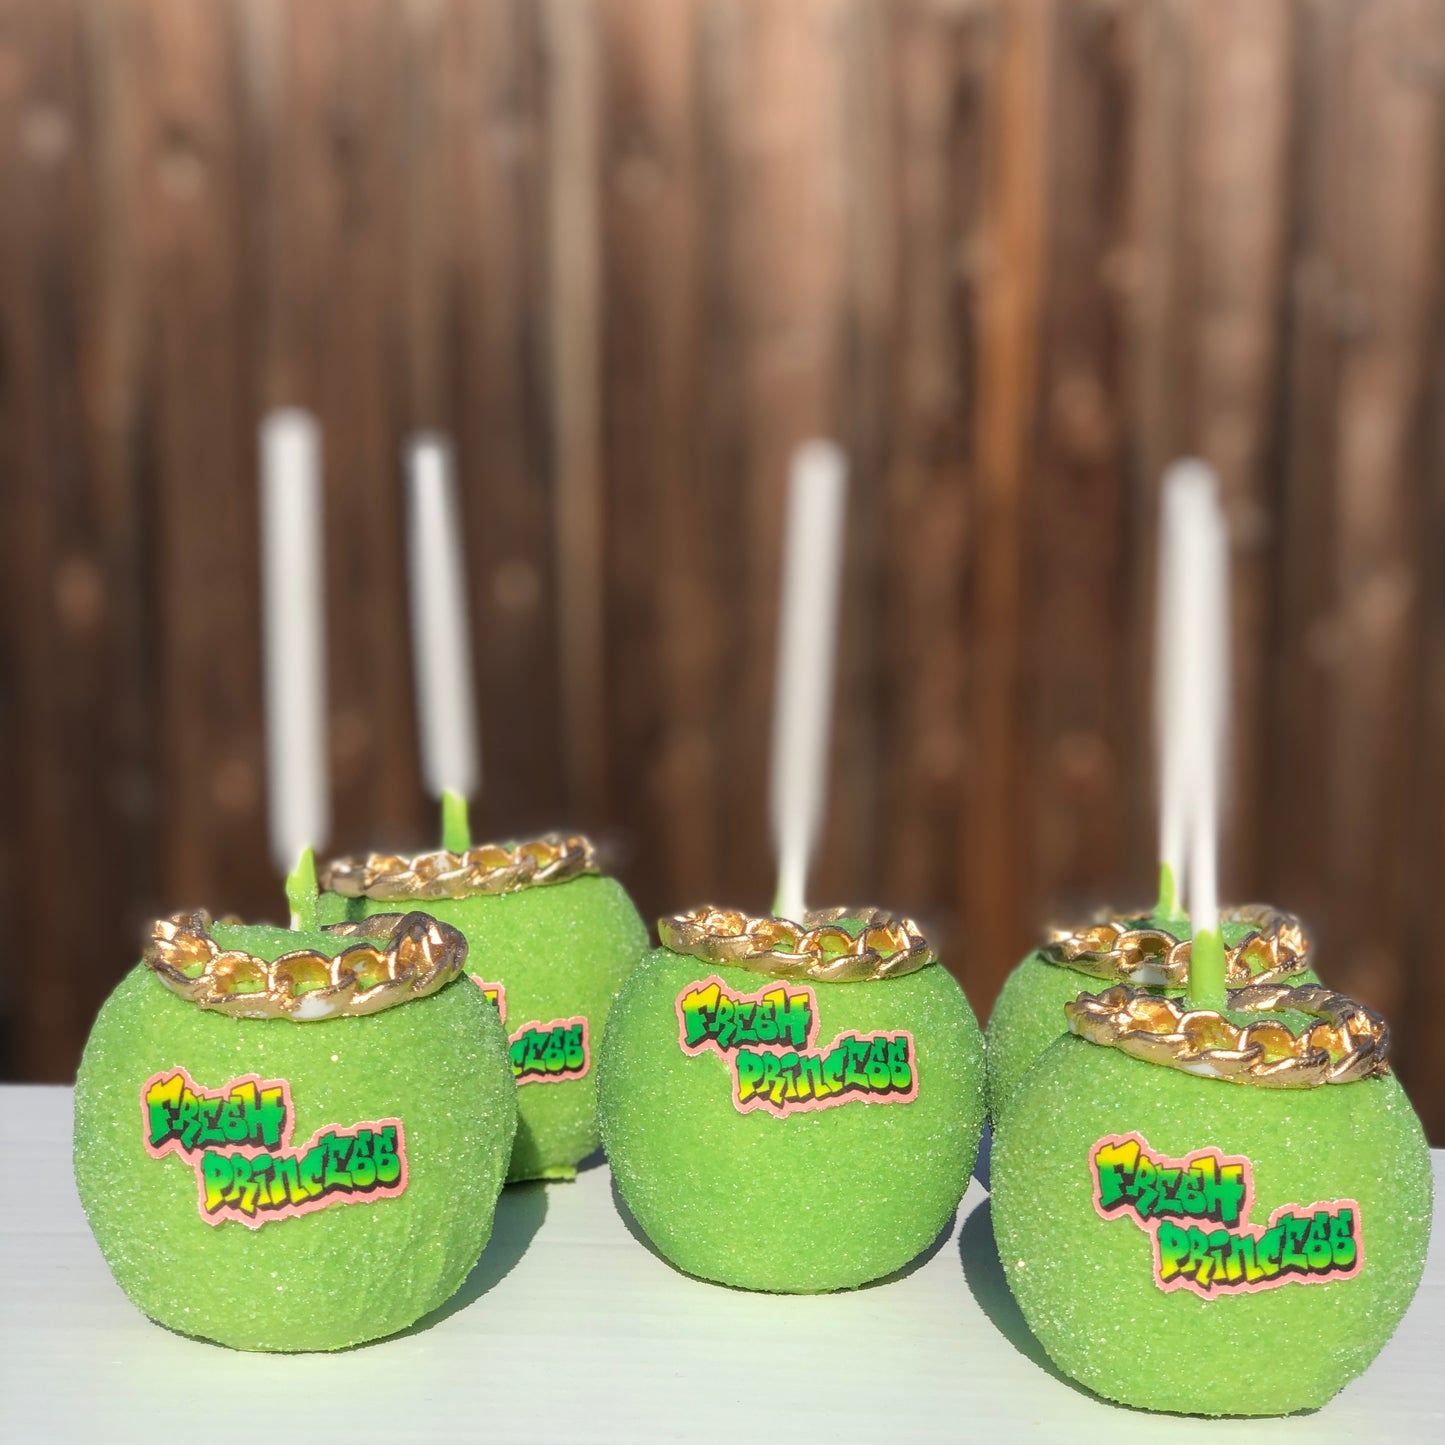 Chocolate Covered Apples 12ct.